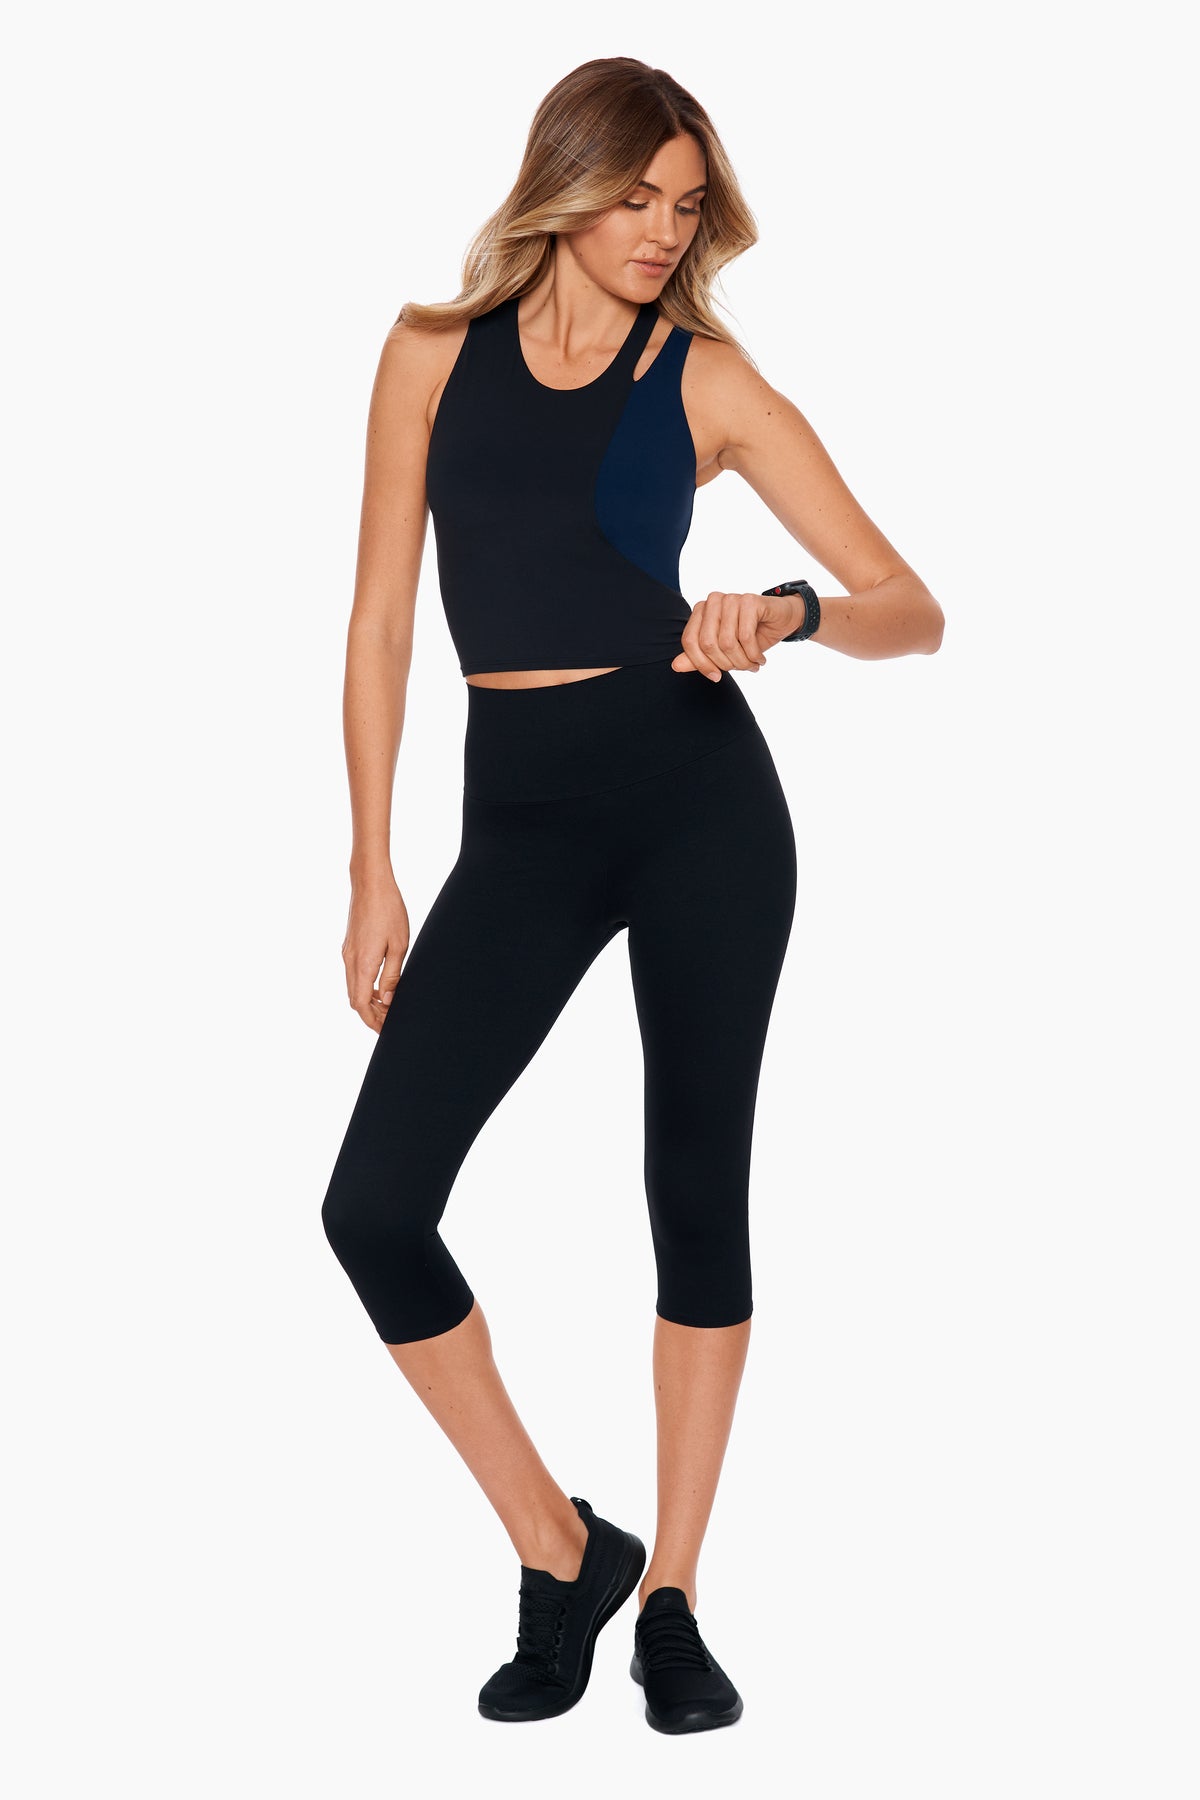 Miraclesuit Women's Cire Moderate Tummy Control Athleisure Leggings